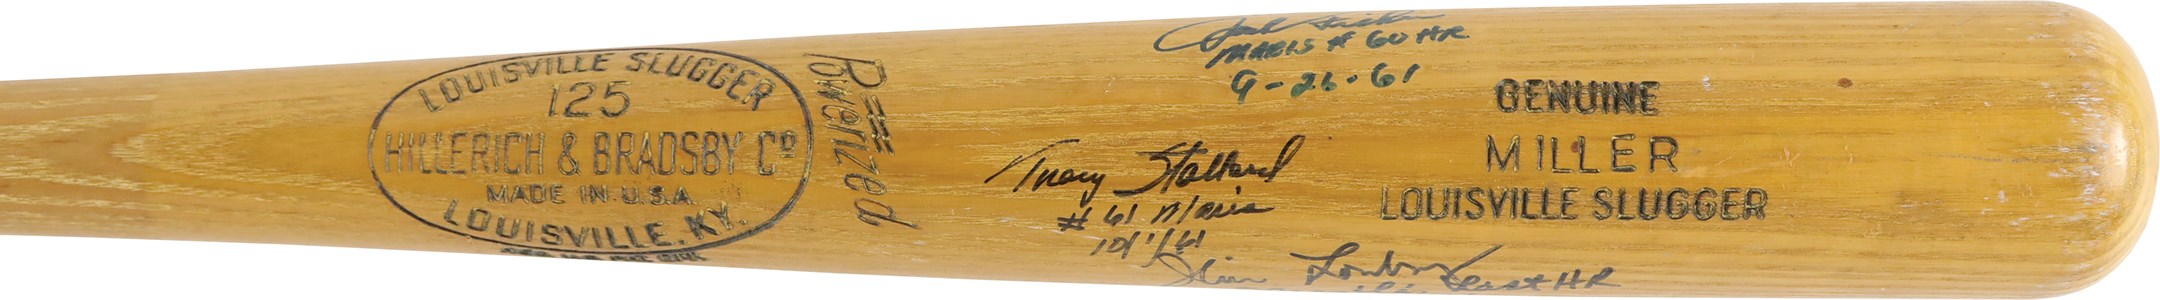 Mickey Mantle and Roger Maris Home Run Pitchers Signed Bat